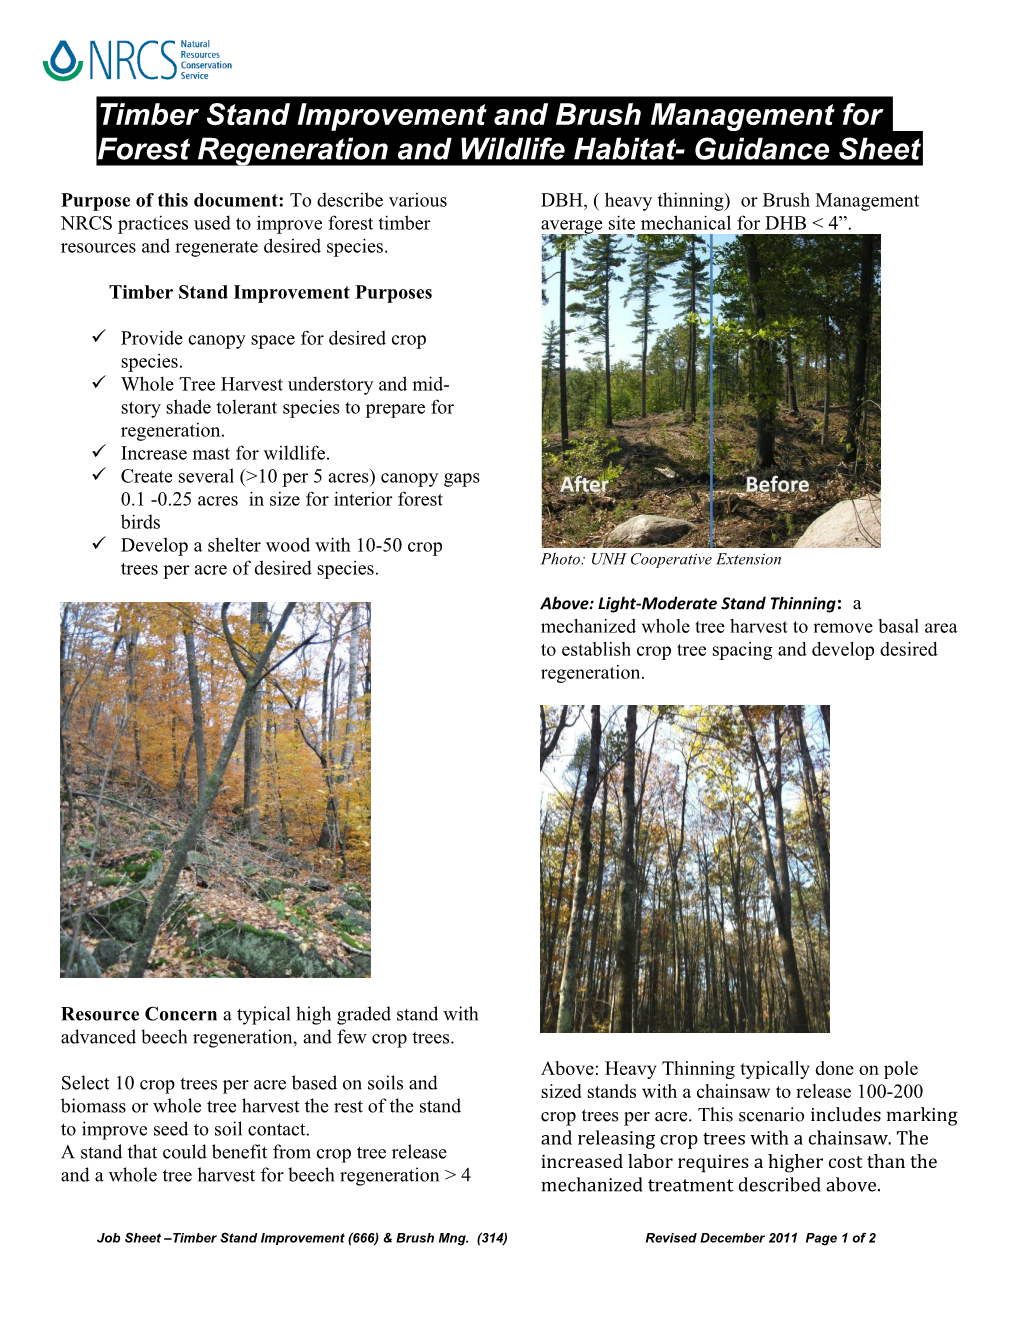 Job Sheet Timber Stand Improvement (666) & Brush Mng. (314)Revised December 2011 Page 1 of 2